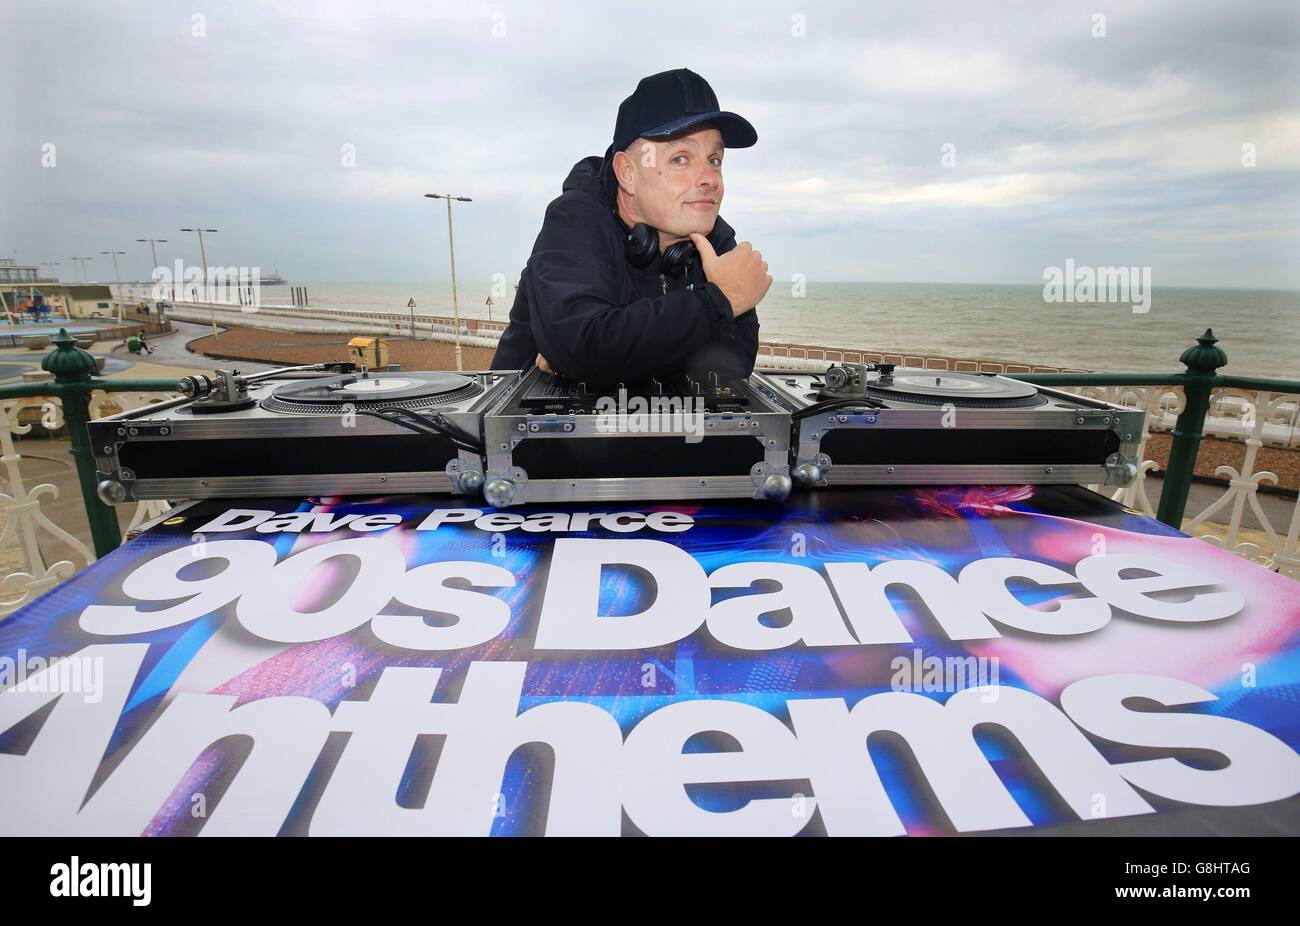 DJ Dave Pearce during a photocall in Brighton, East Sussex, ahead of the launch of his album Dave Pearce 90s Dance Athems, which is released on December 25th on WMTV. Stock Photo